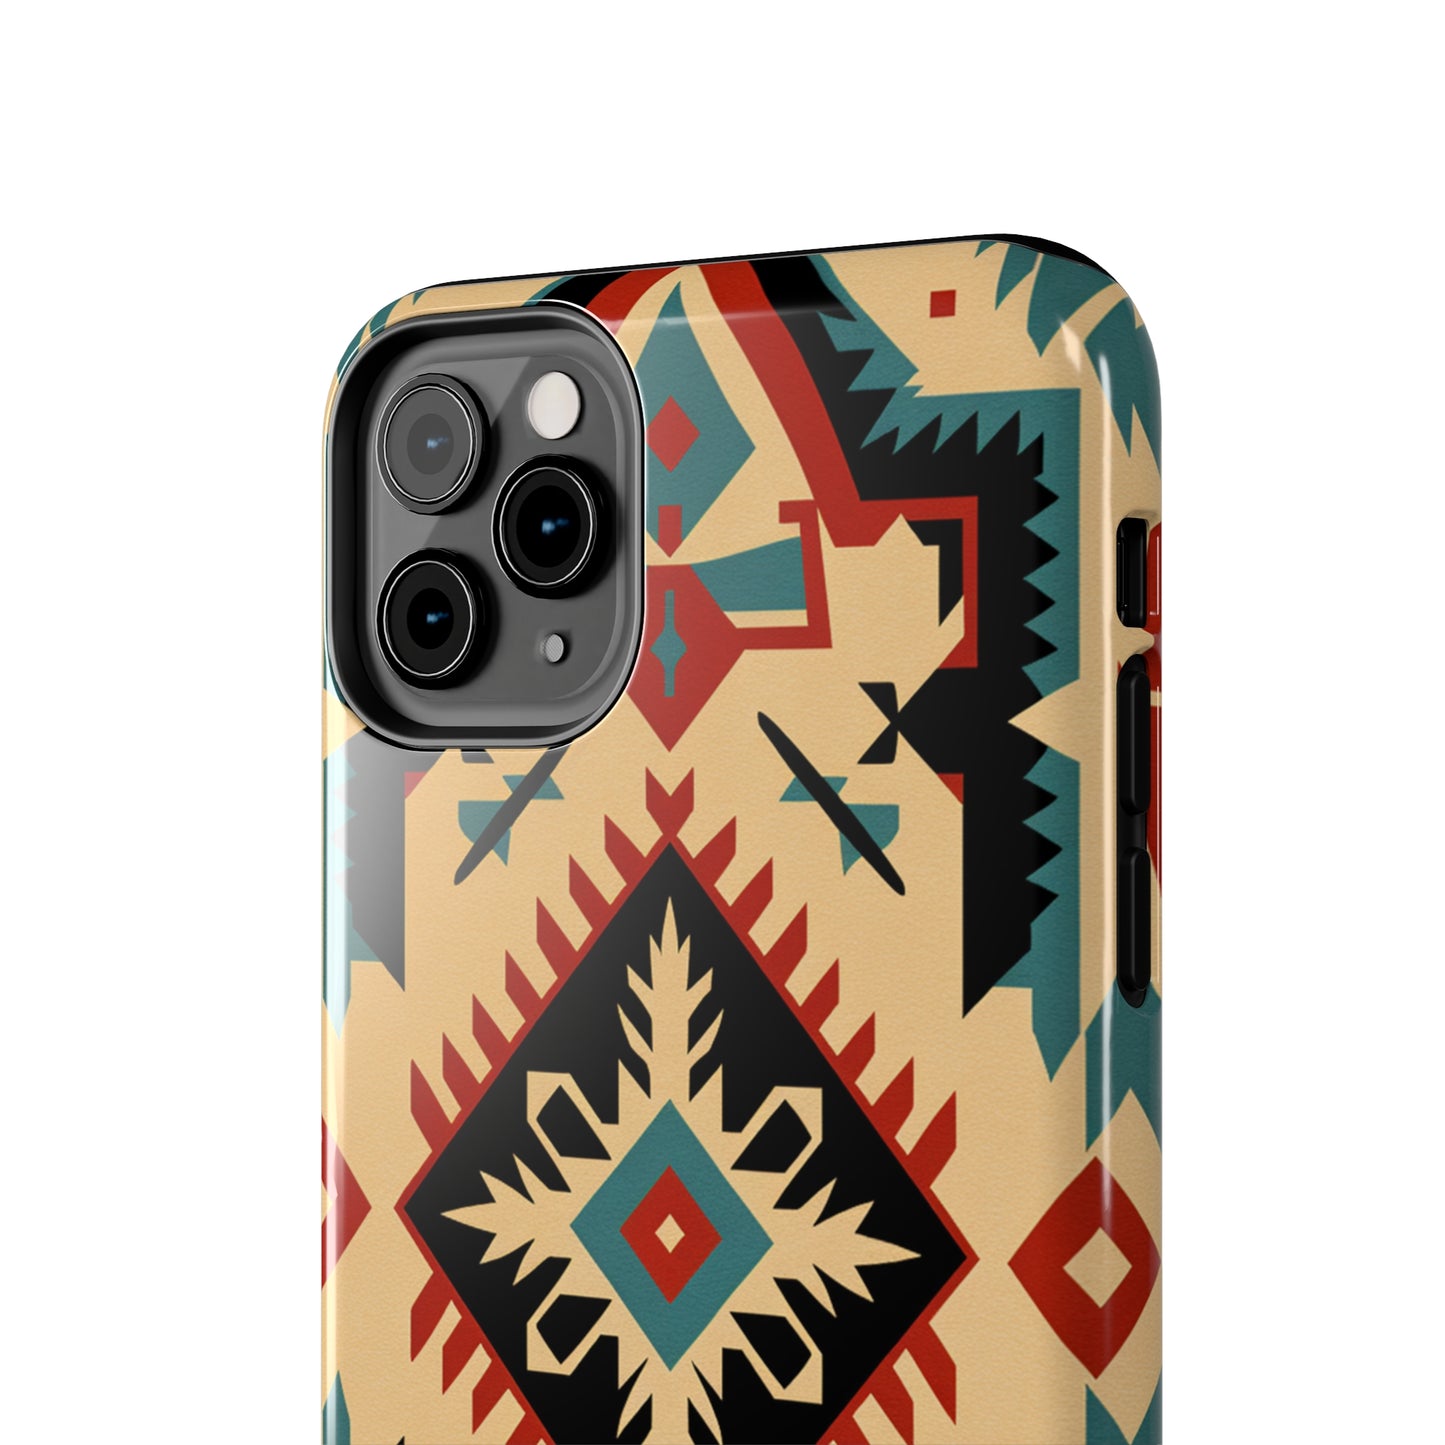 Native American Santa Fe Style Abstract iPhone Case